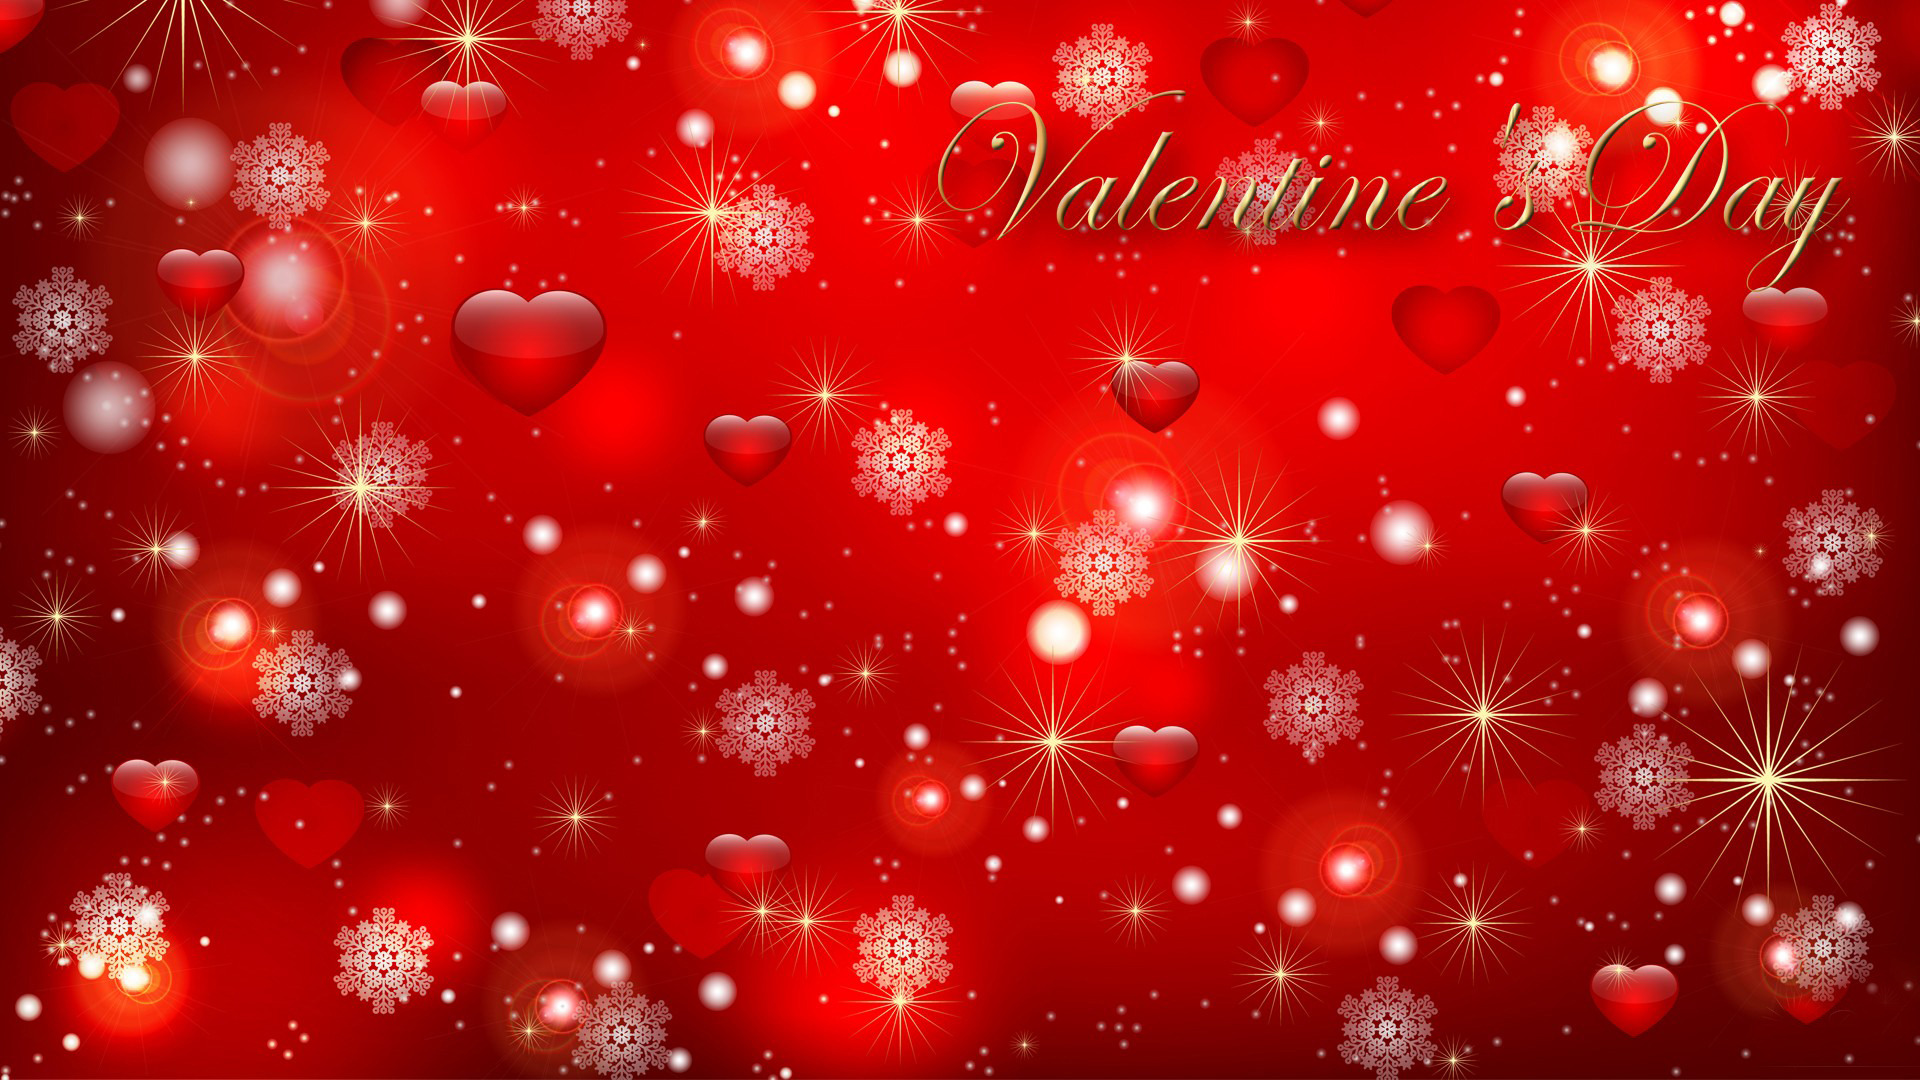 Valentine Day Image Pictures Amp Wallpaper